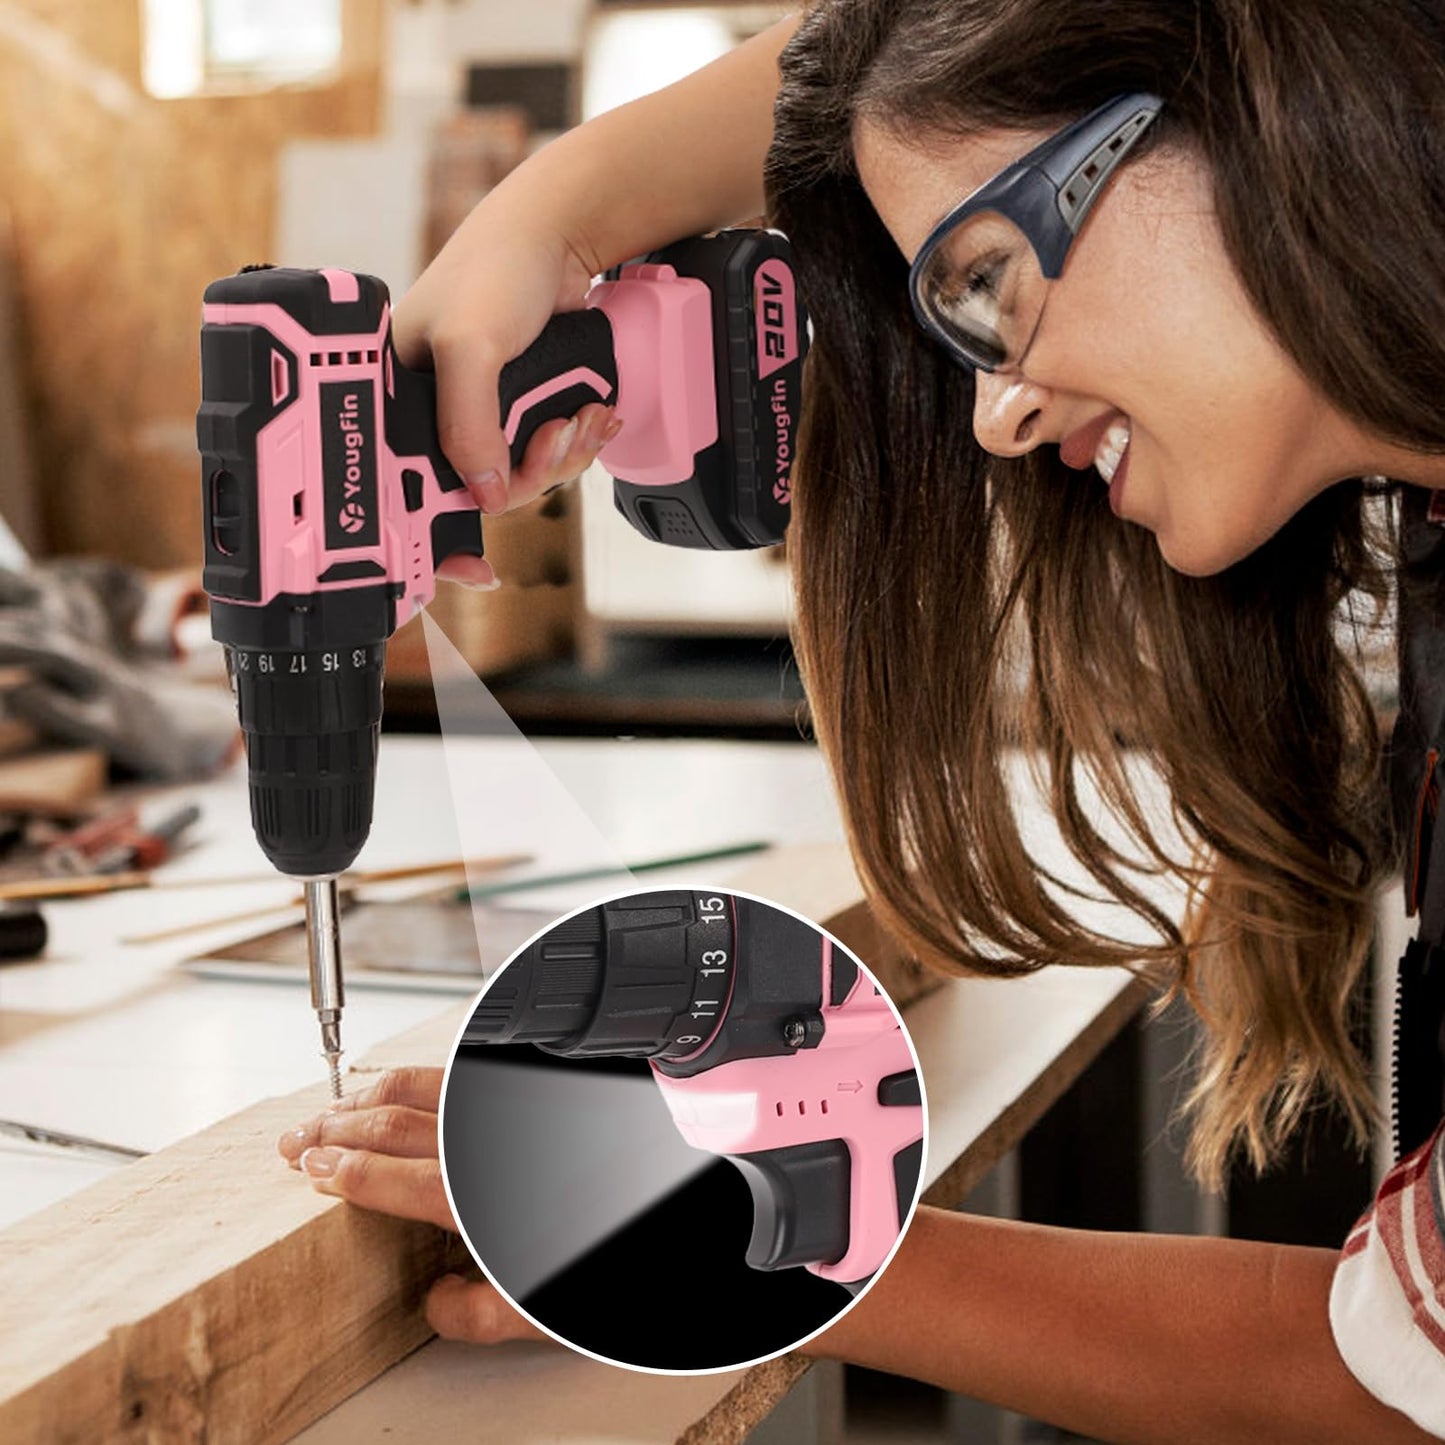 Yougfin Cordless Drill Set Pink For Ladies, 20V Power Drill Driver With Battery & Charger, 3/8" Keyless Chuck, Variable Speed, 25+1 Torque Setting,